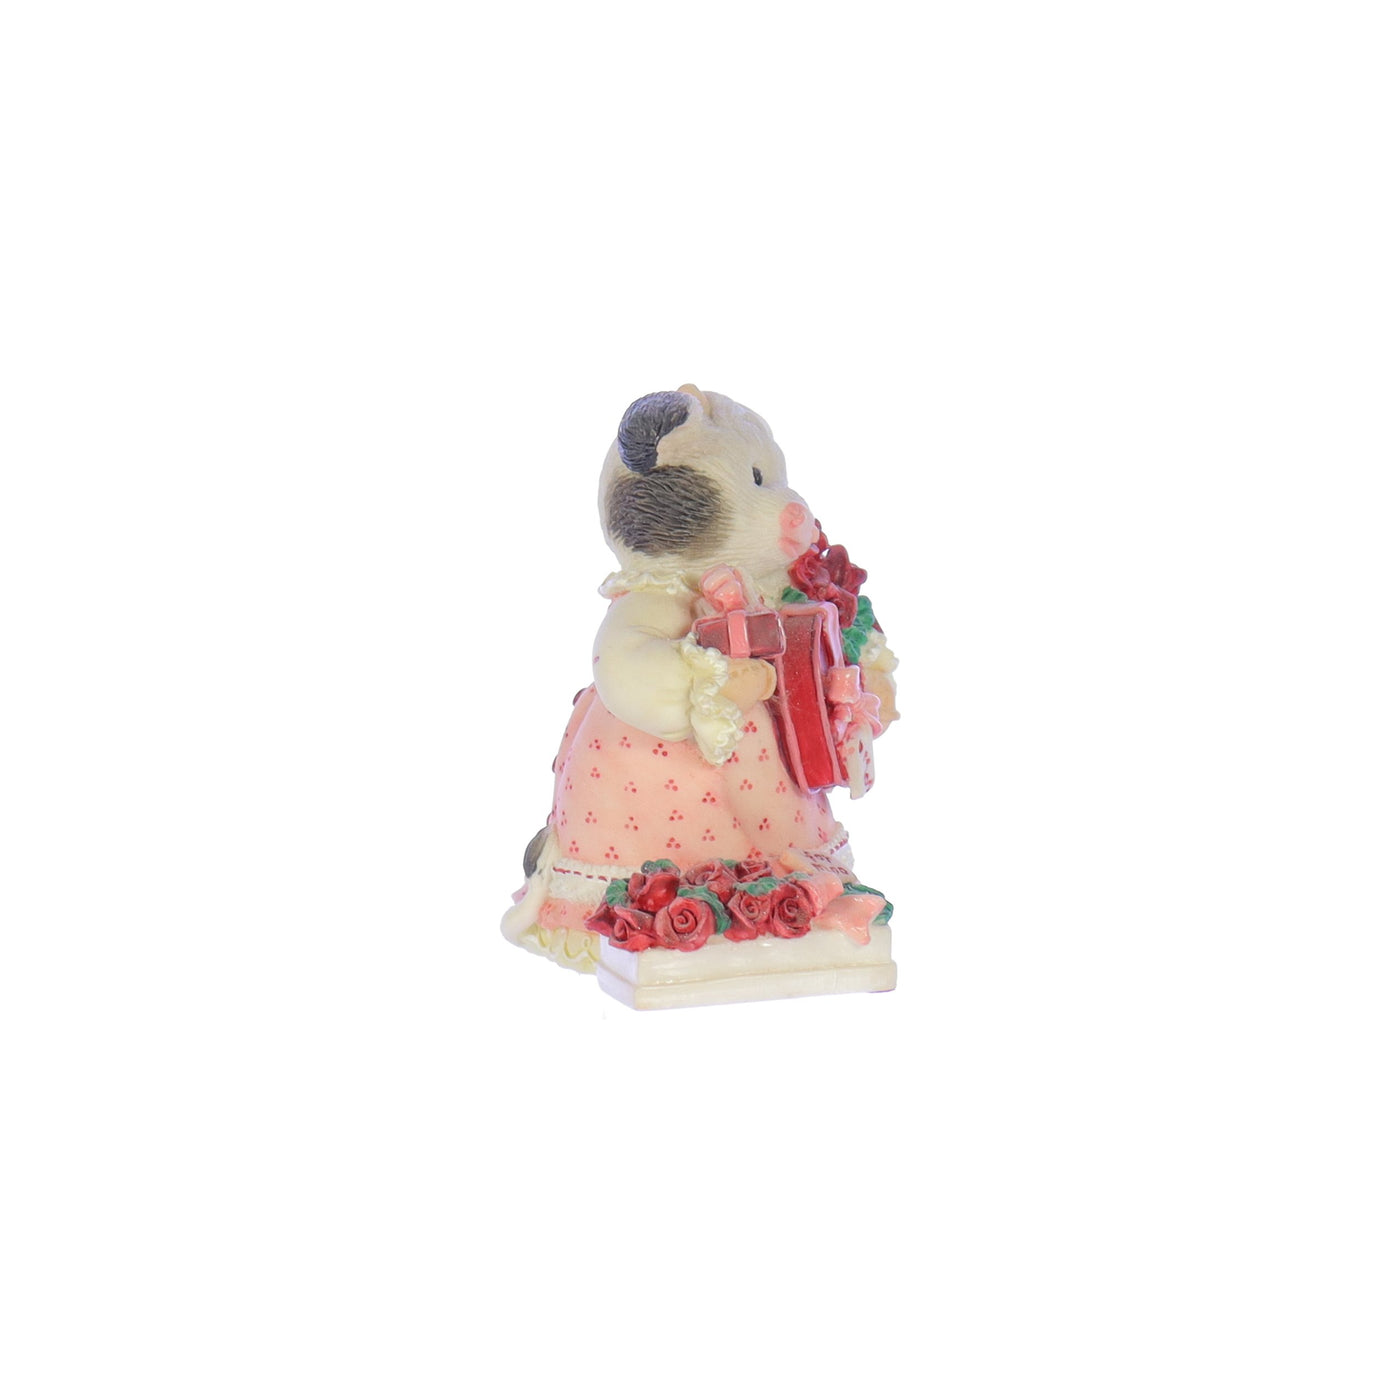 Marys-Moo-Moos-by-Mary-Rhyner-Nadig-Resin-Figurine-February-Im-Just-A-Cow-Who-Cant-Say-No-257451